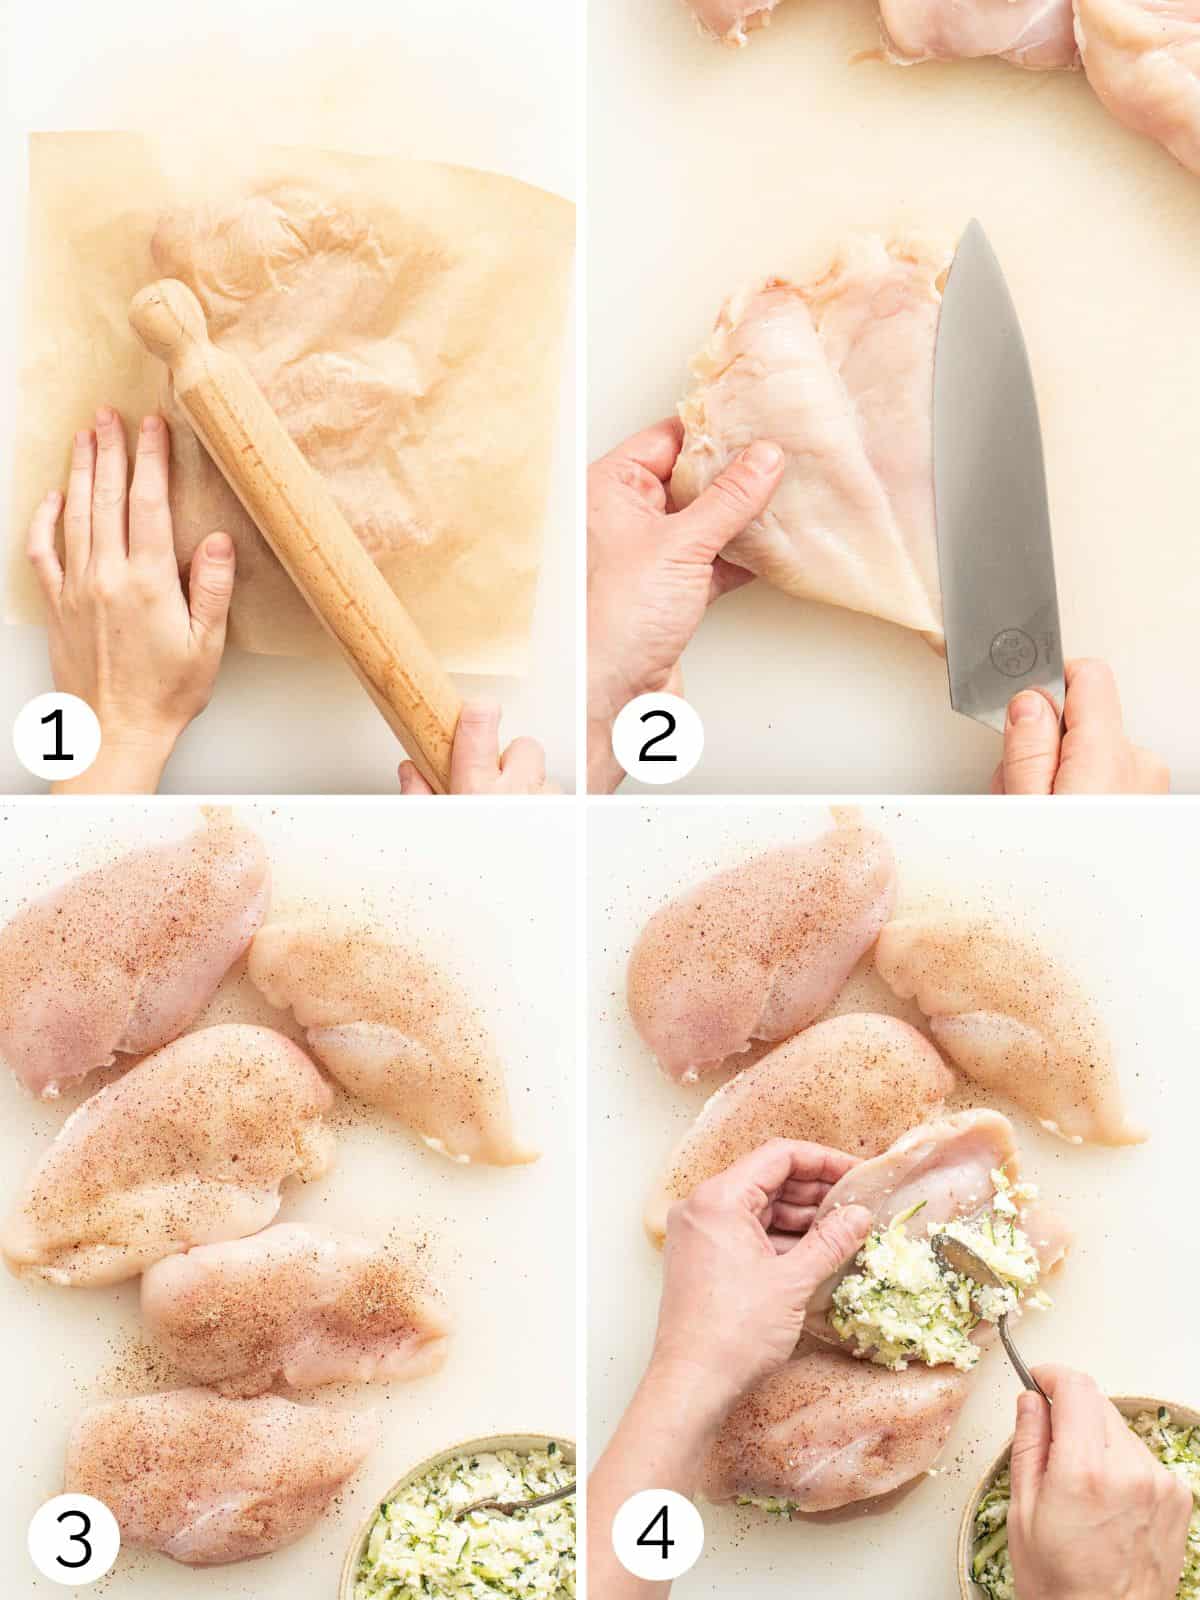 Process photos of how to flatten chicken and stuff it.